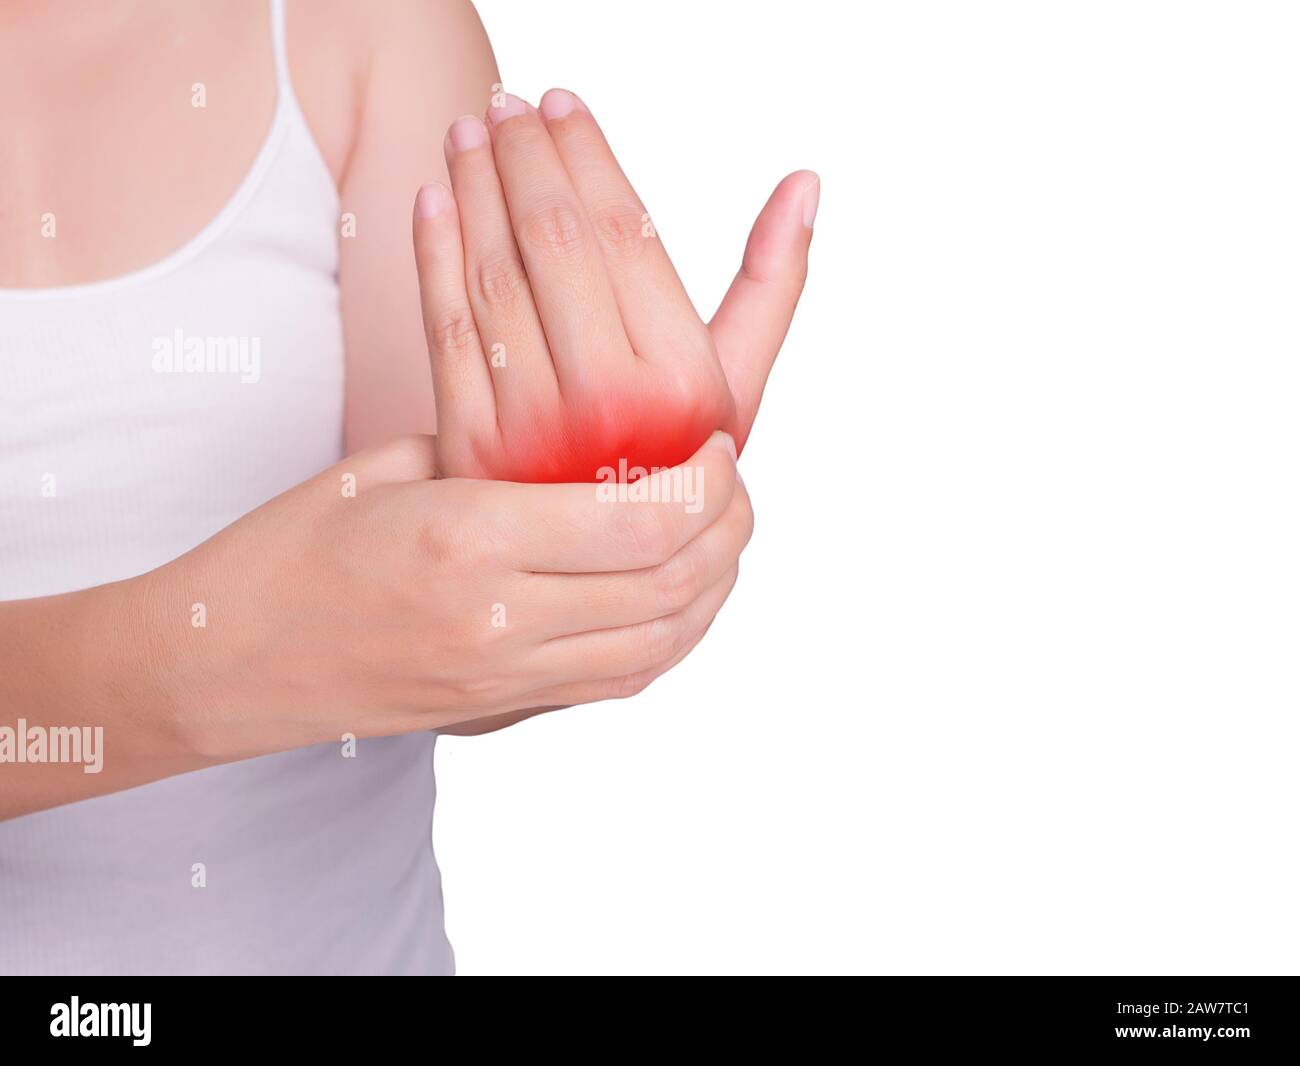 woman suffering from pain in hand. red color highlight at hand isolated on white background. health care and medical concept, studio shot Stock Photo